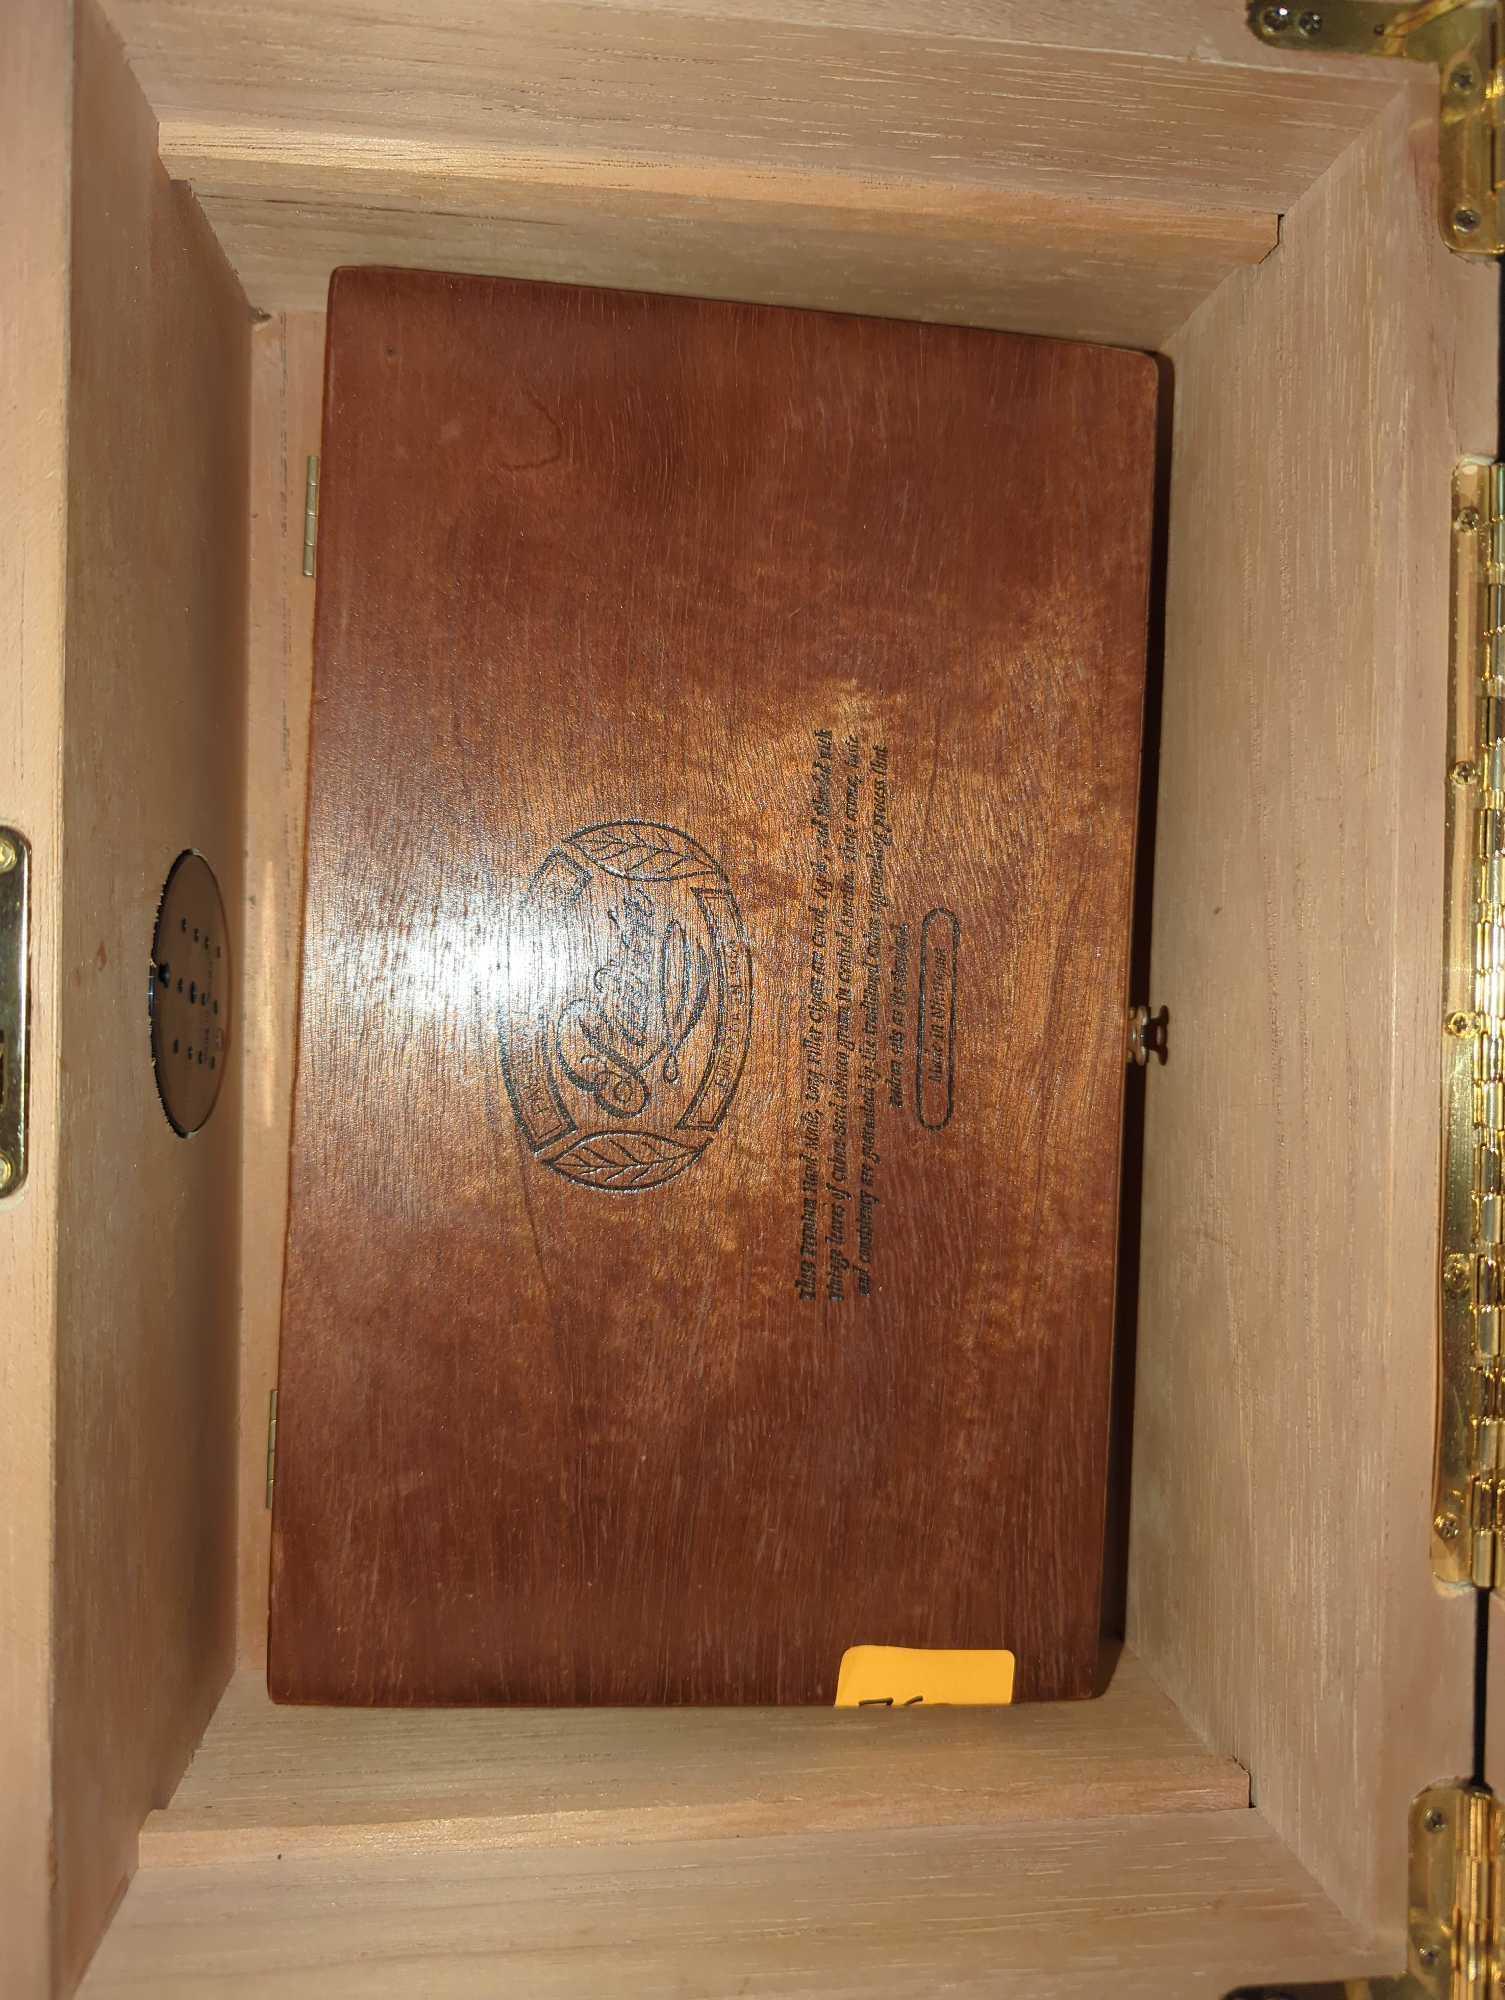 (BR3) LOT OF 3 WOODEN CIGAR BOXES, APPEARS TO HAVE SOME MINOR WEAR, BOX 1 DIMENSIONS - 6" H X 14" W